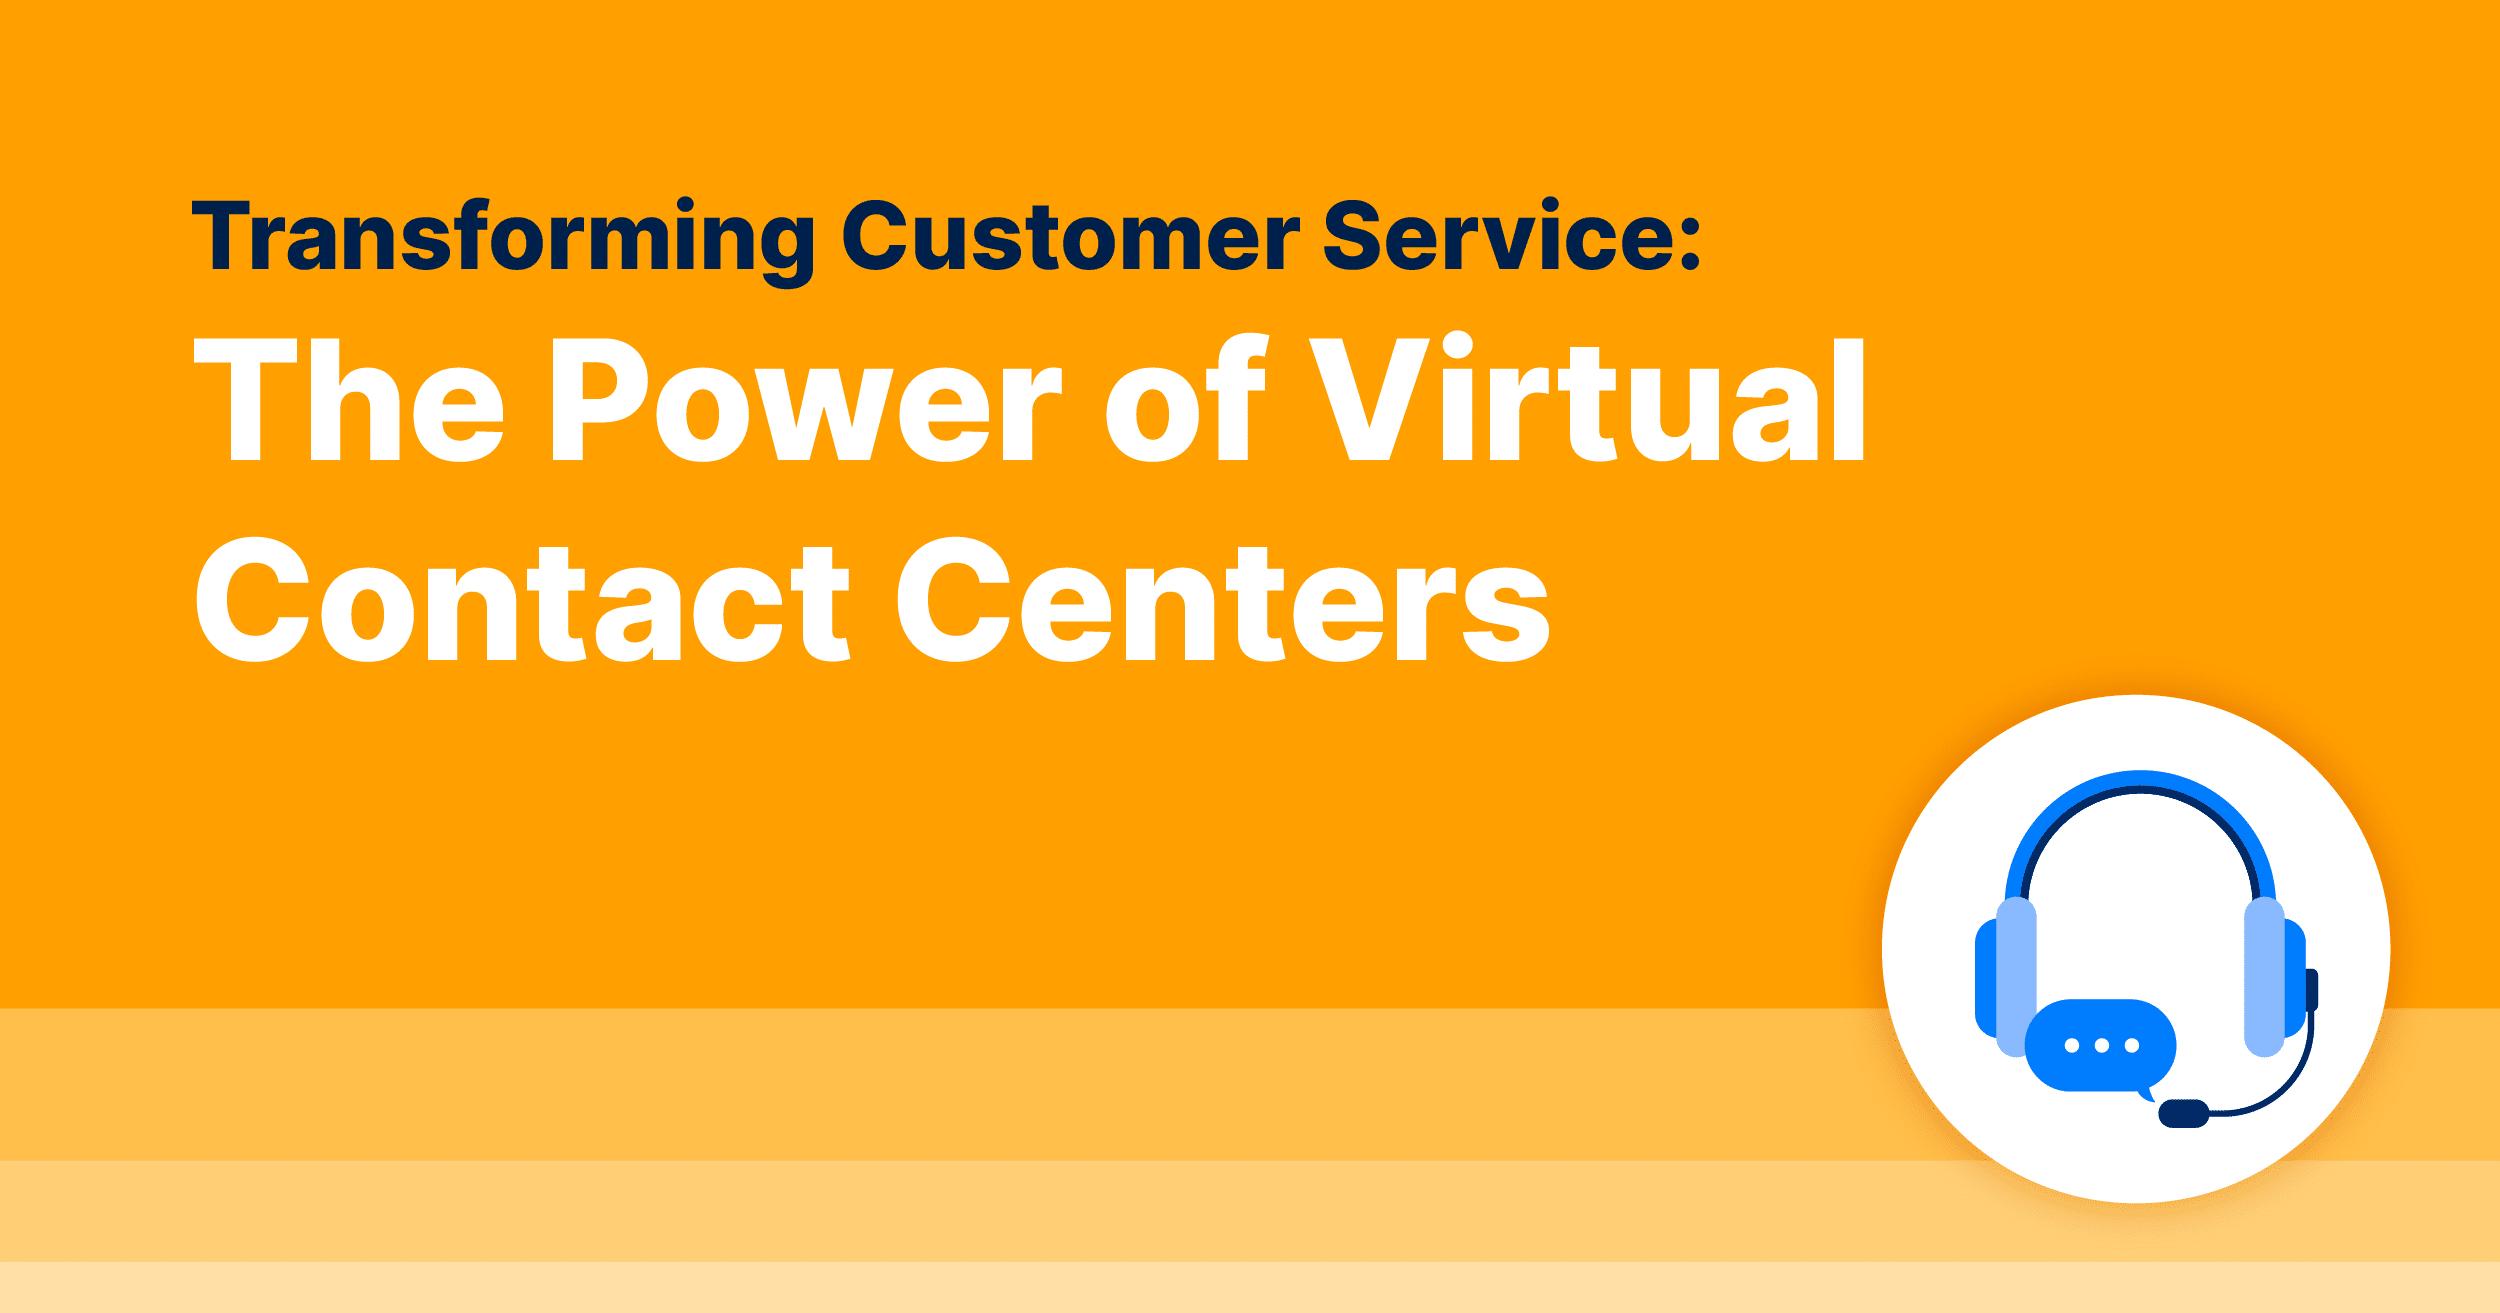 Transforming Customer Service: The Power of Virtual Contact Centers